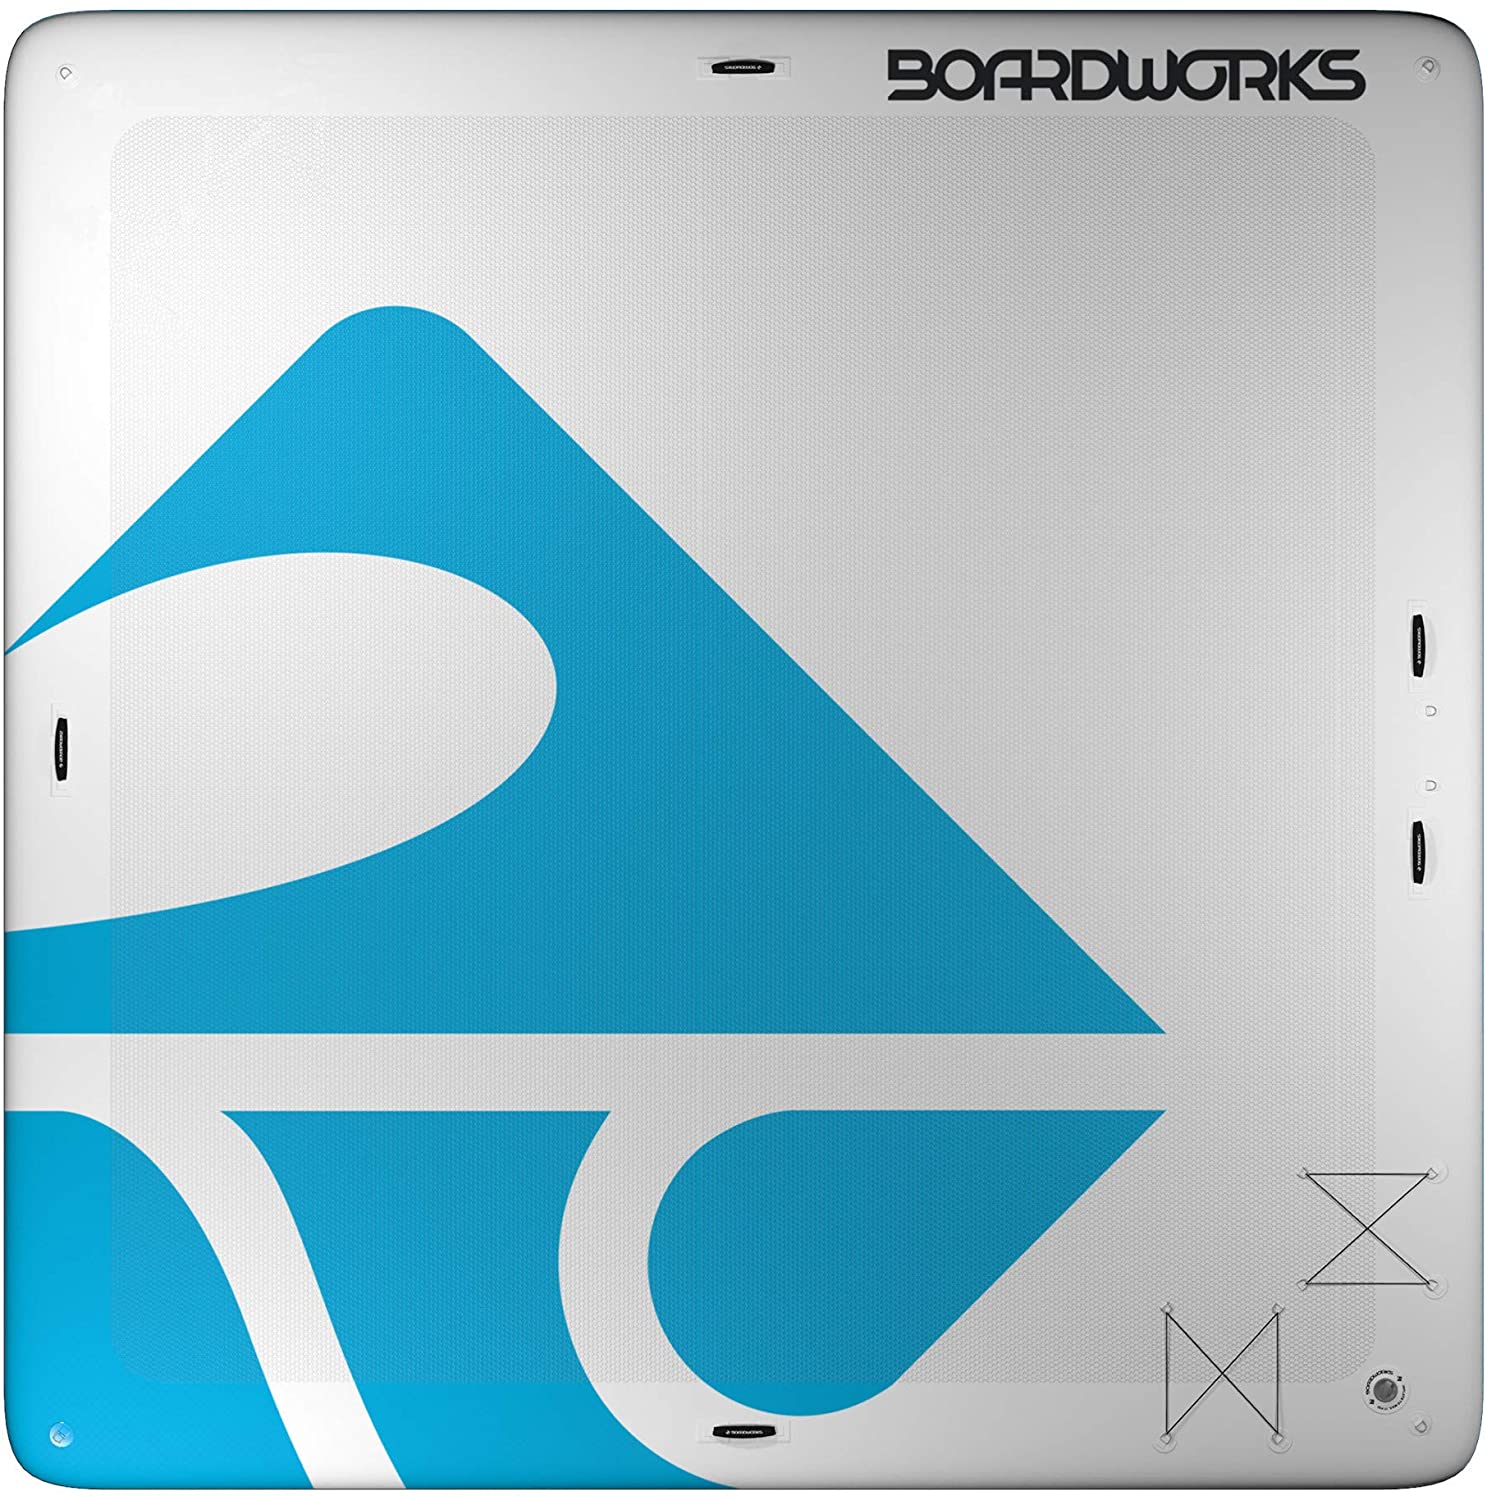 portable swim platform review for boardworks one of the largest, sturdy, floating docks